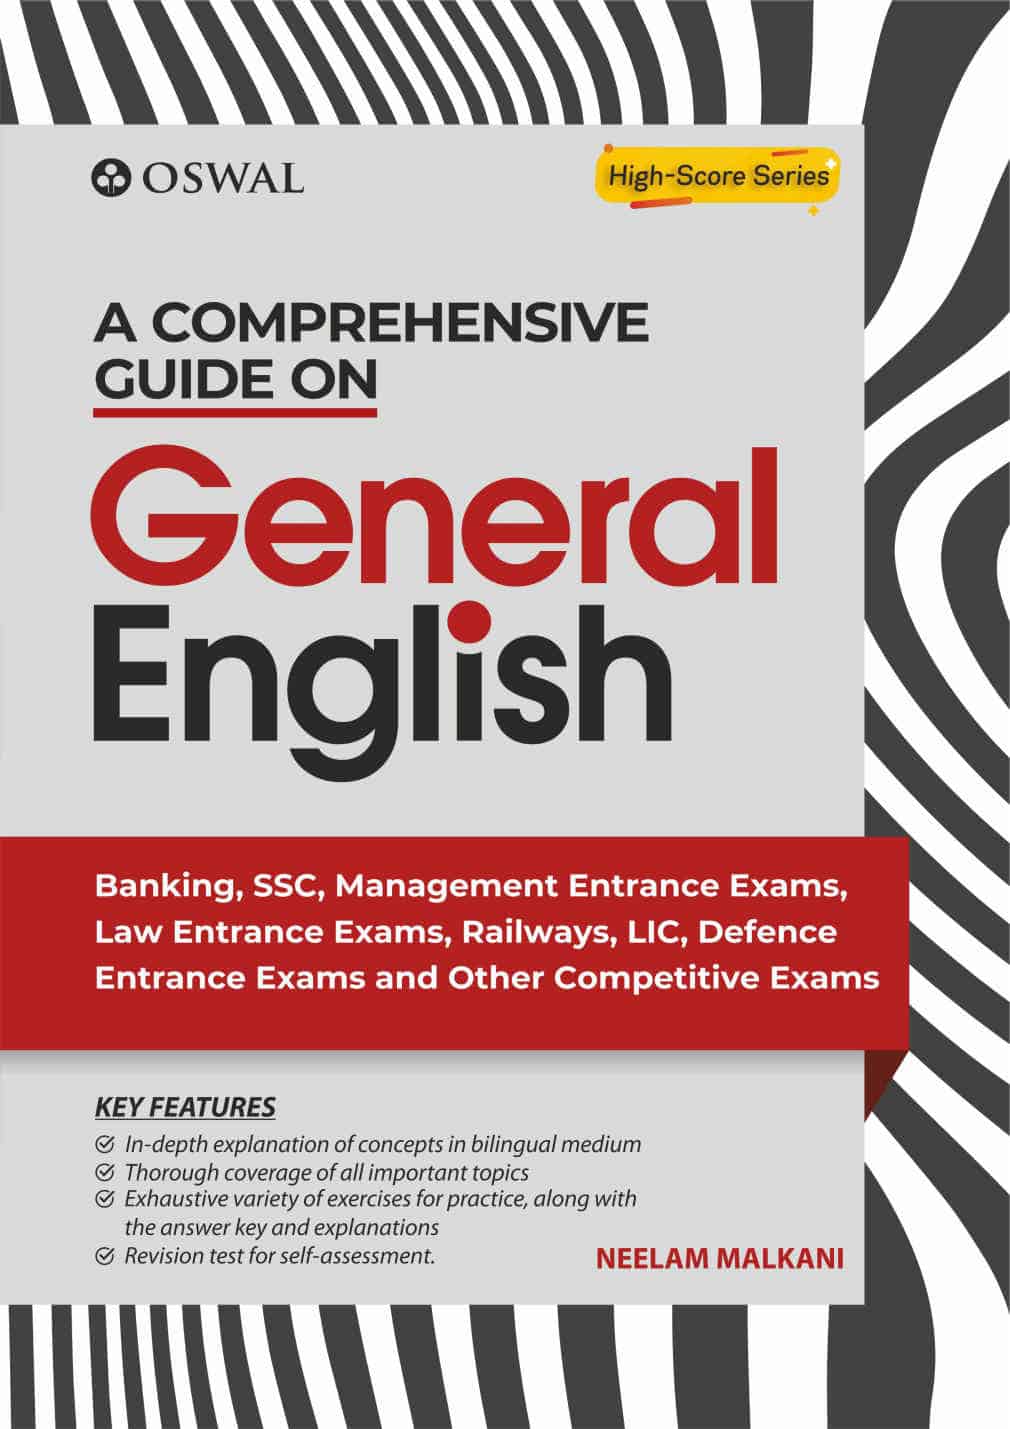 Oswal A Comprehensive Guide on General English - Neelam Malkani